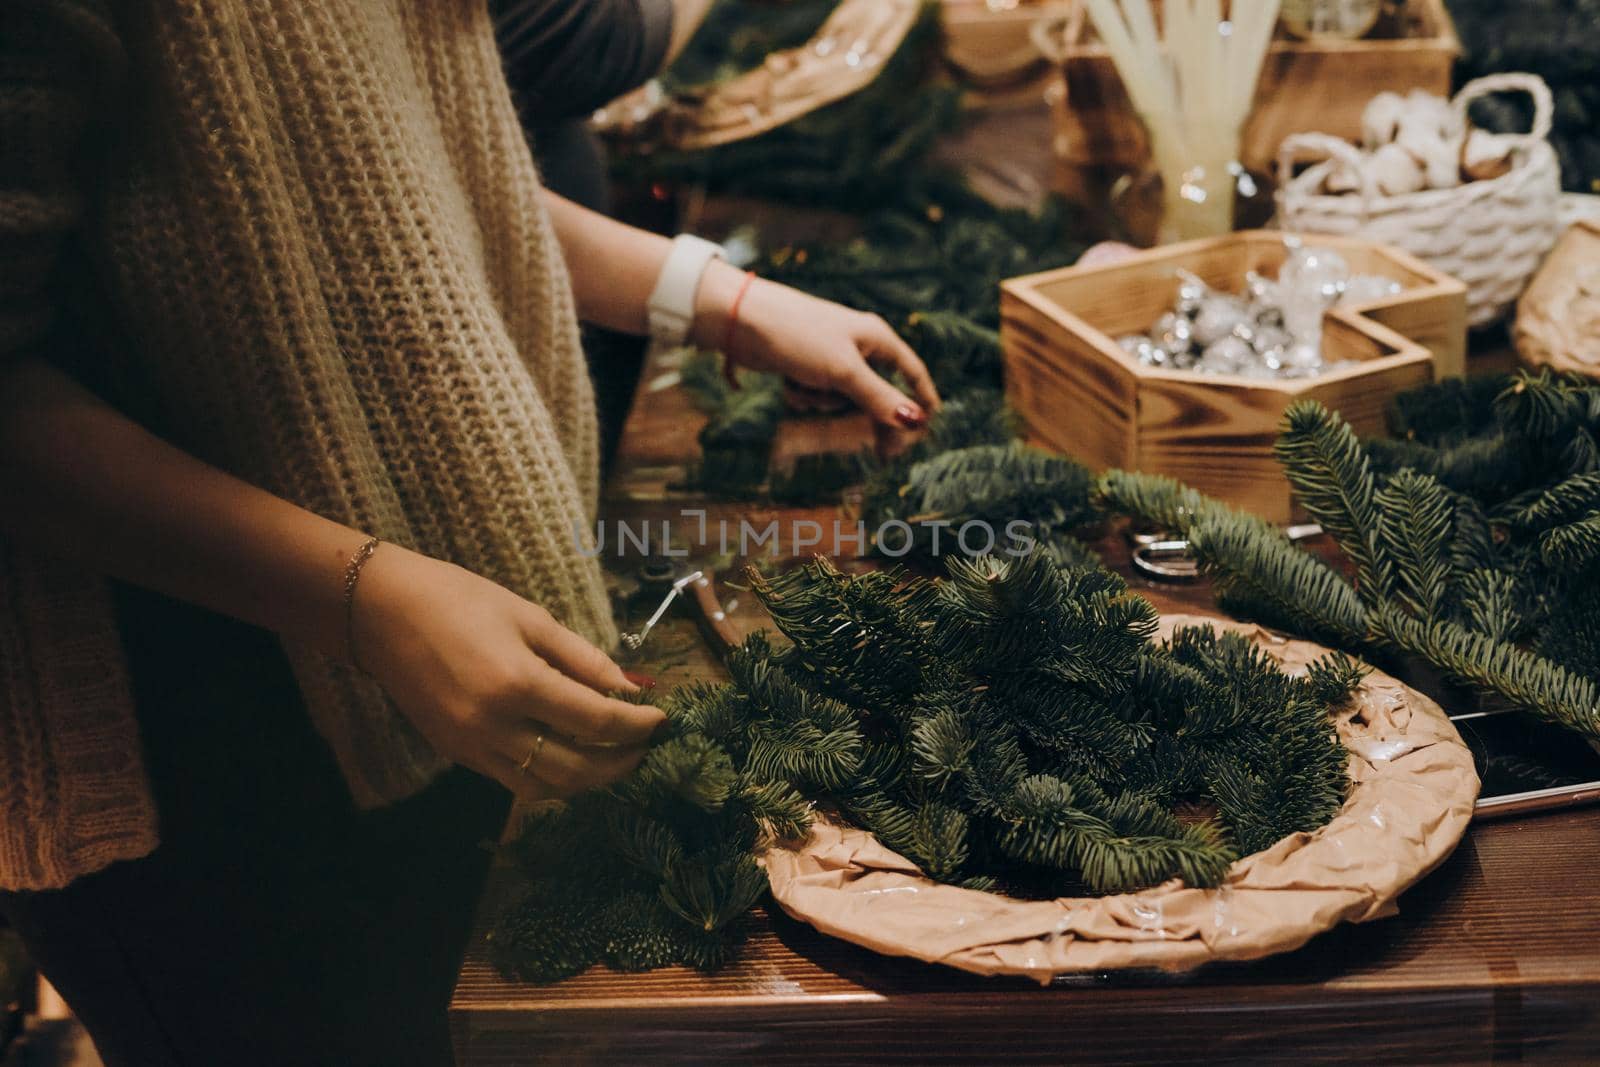 Creating a Christmas wreath of spruce branches and a cardboard frame. Craft paper. Decoration for the house for Christmas. Concept of florist's work before christmas holidays.